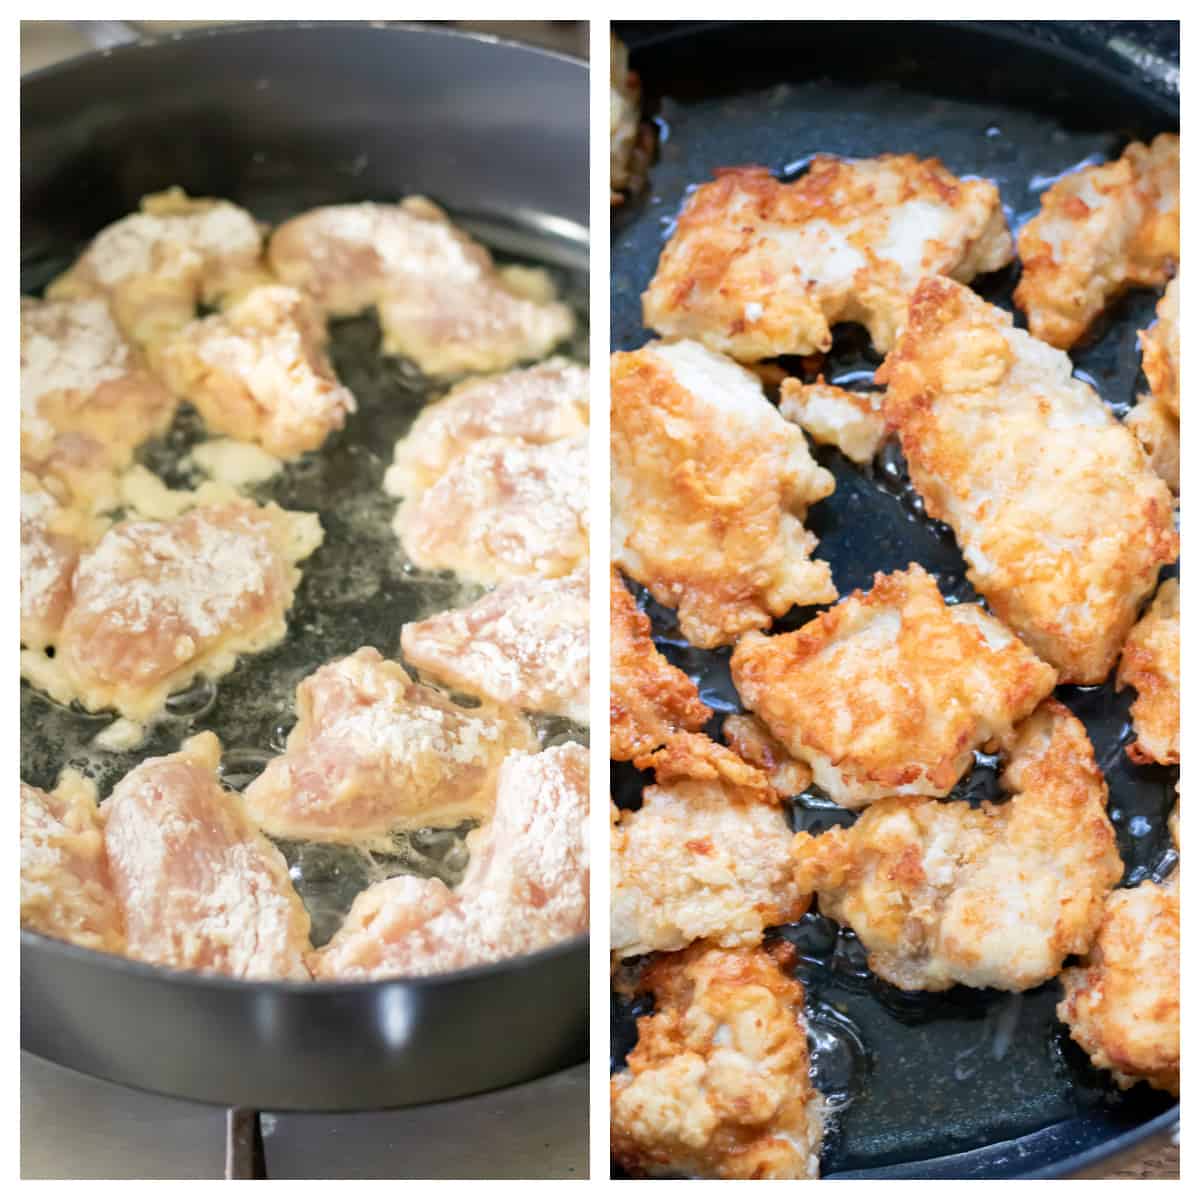 Pan frying coated chicken strips.